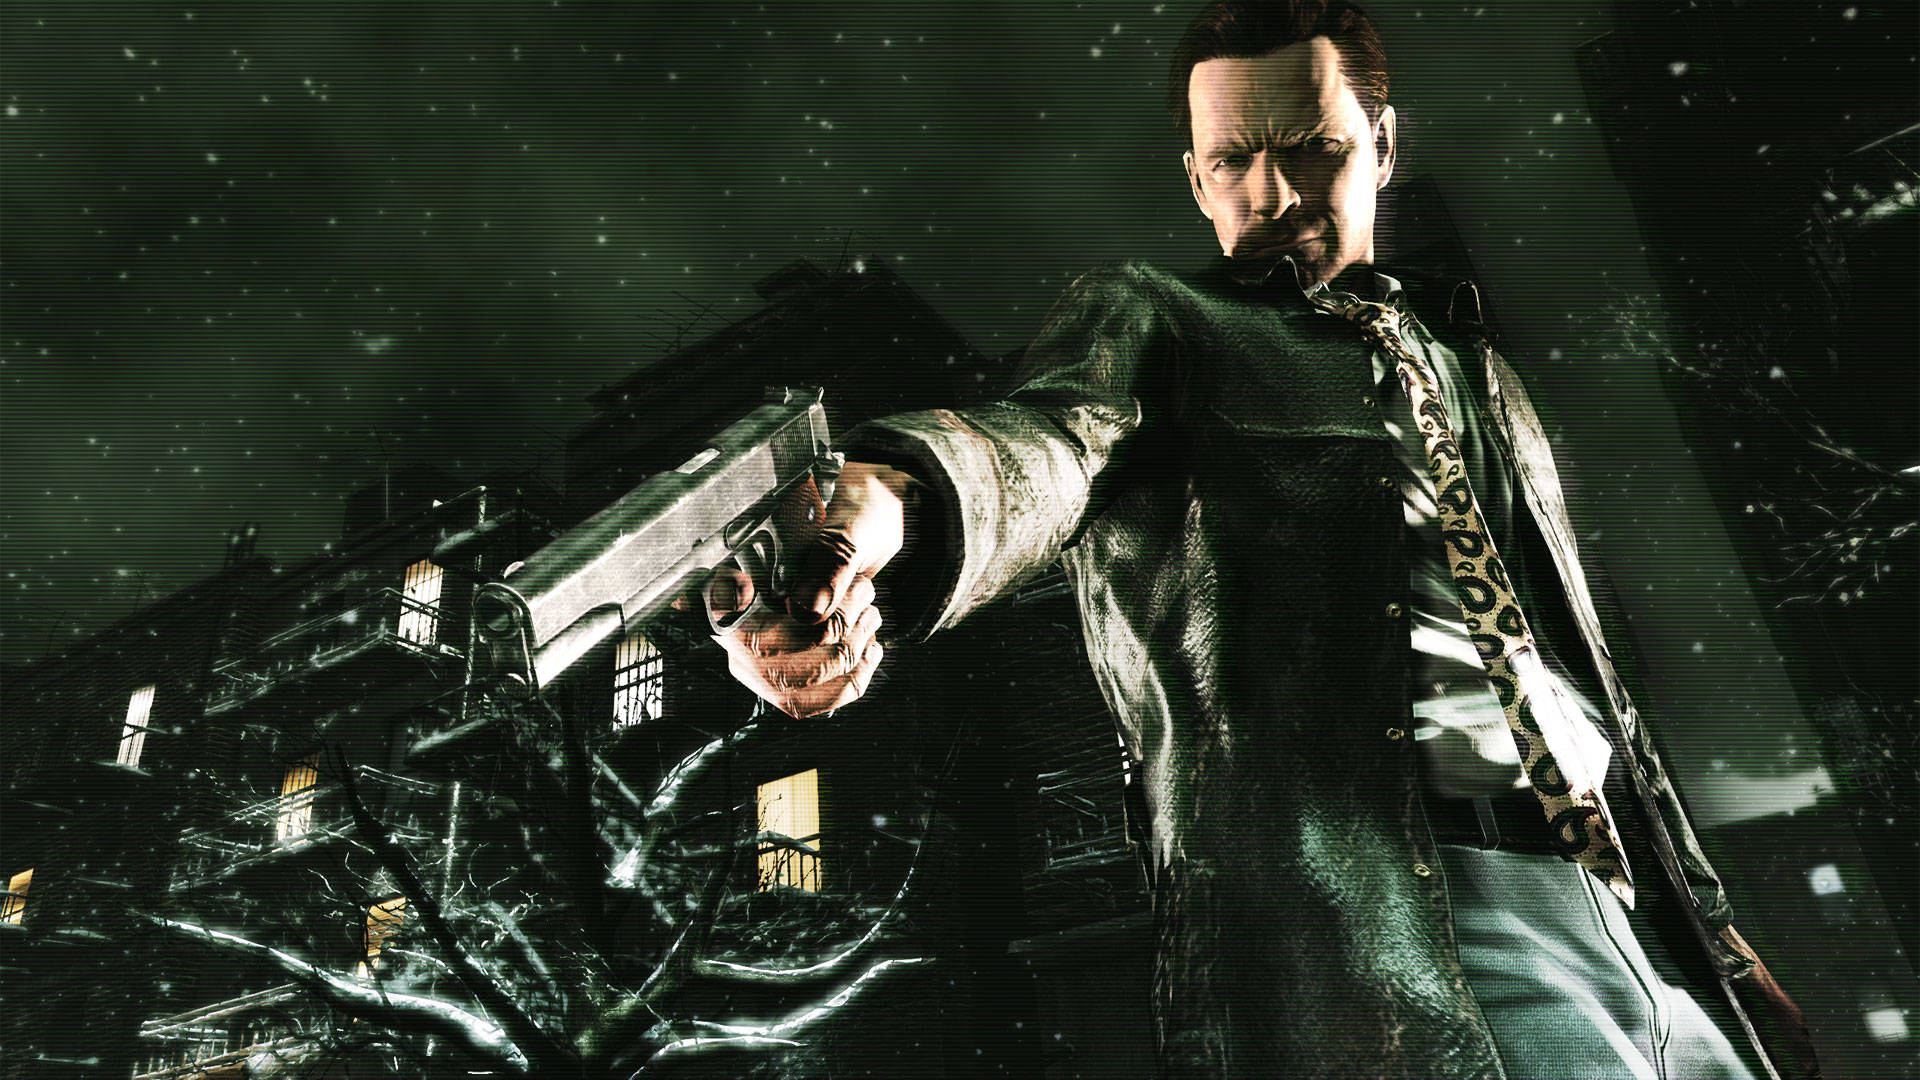 Caption: Max Payne - A Furious Shooter In Action. Background